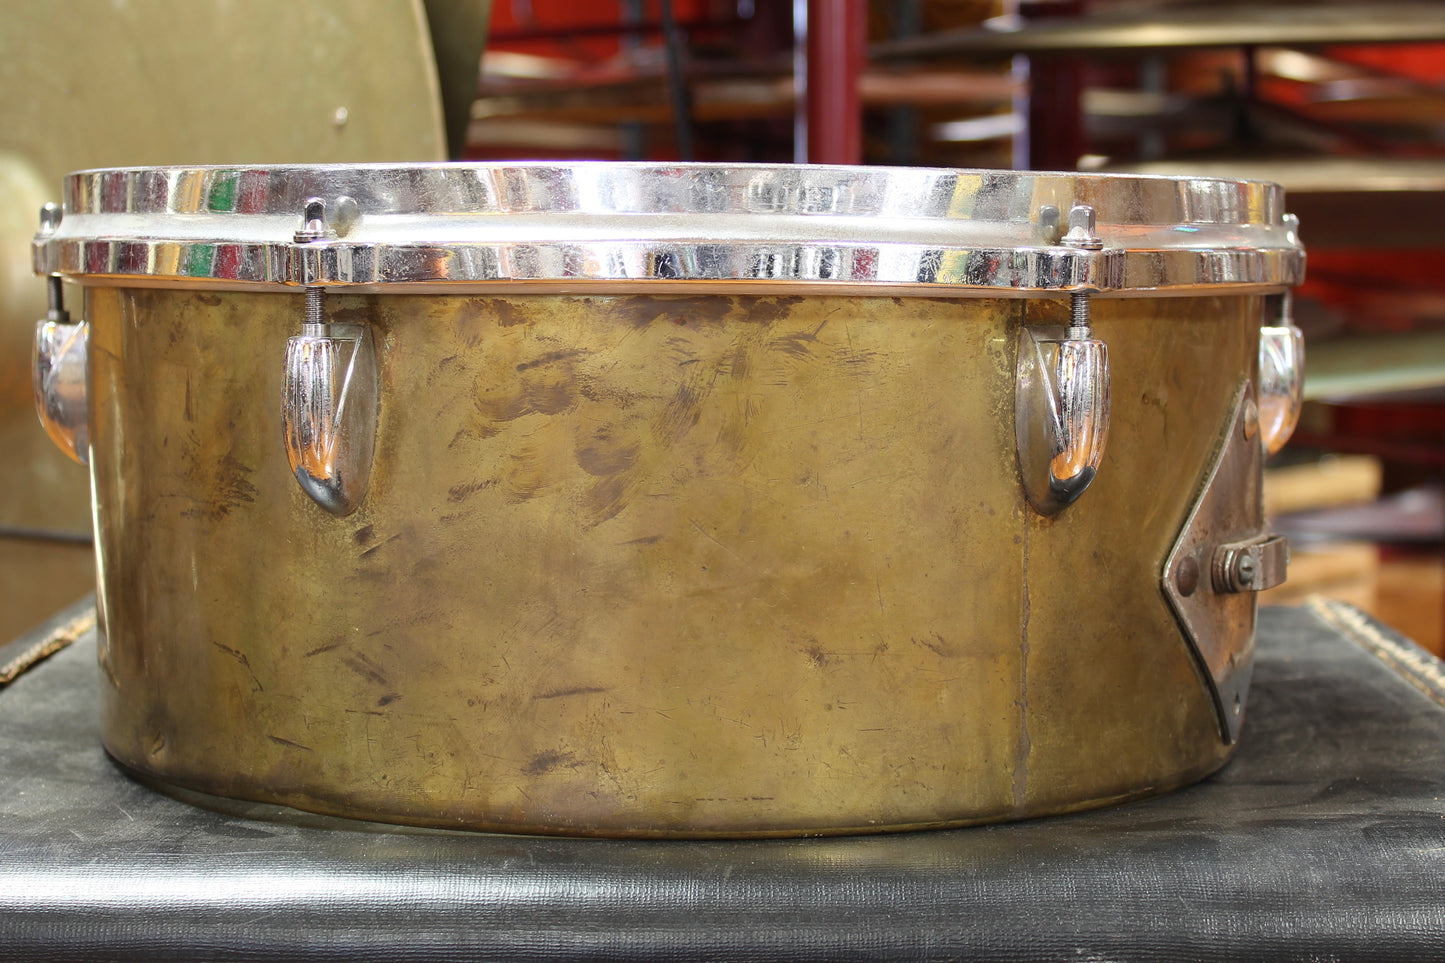 1970's Gretsch 13" and 14" Brass Timbales